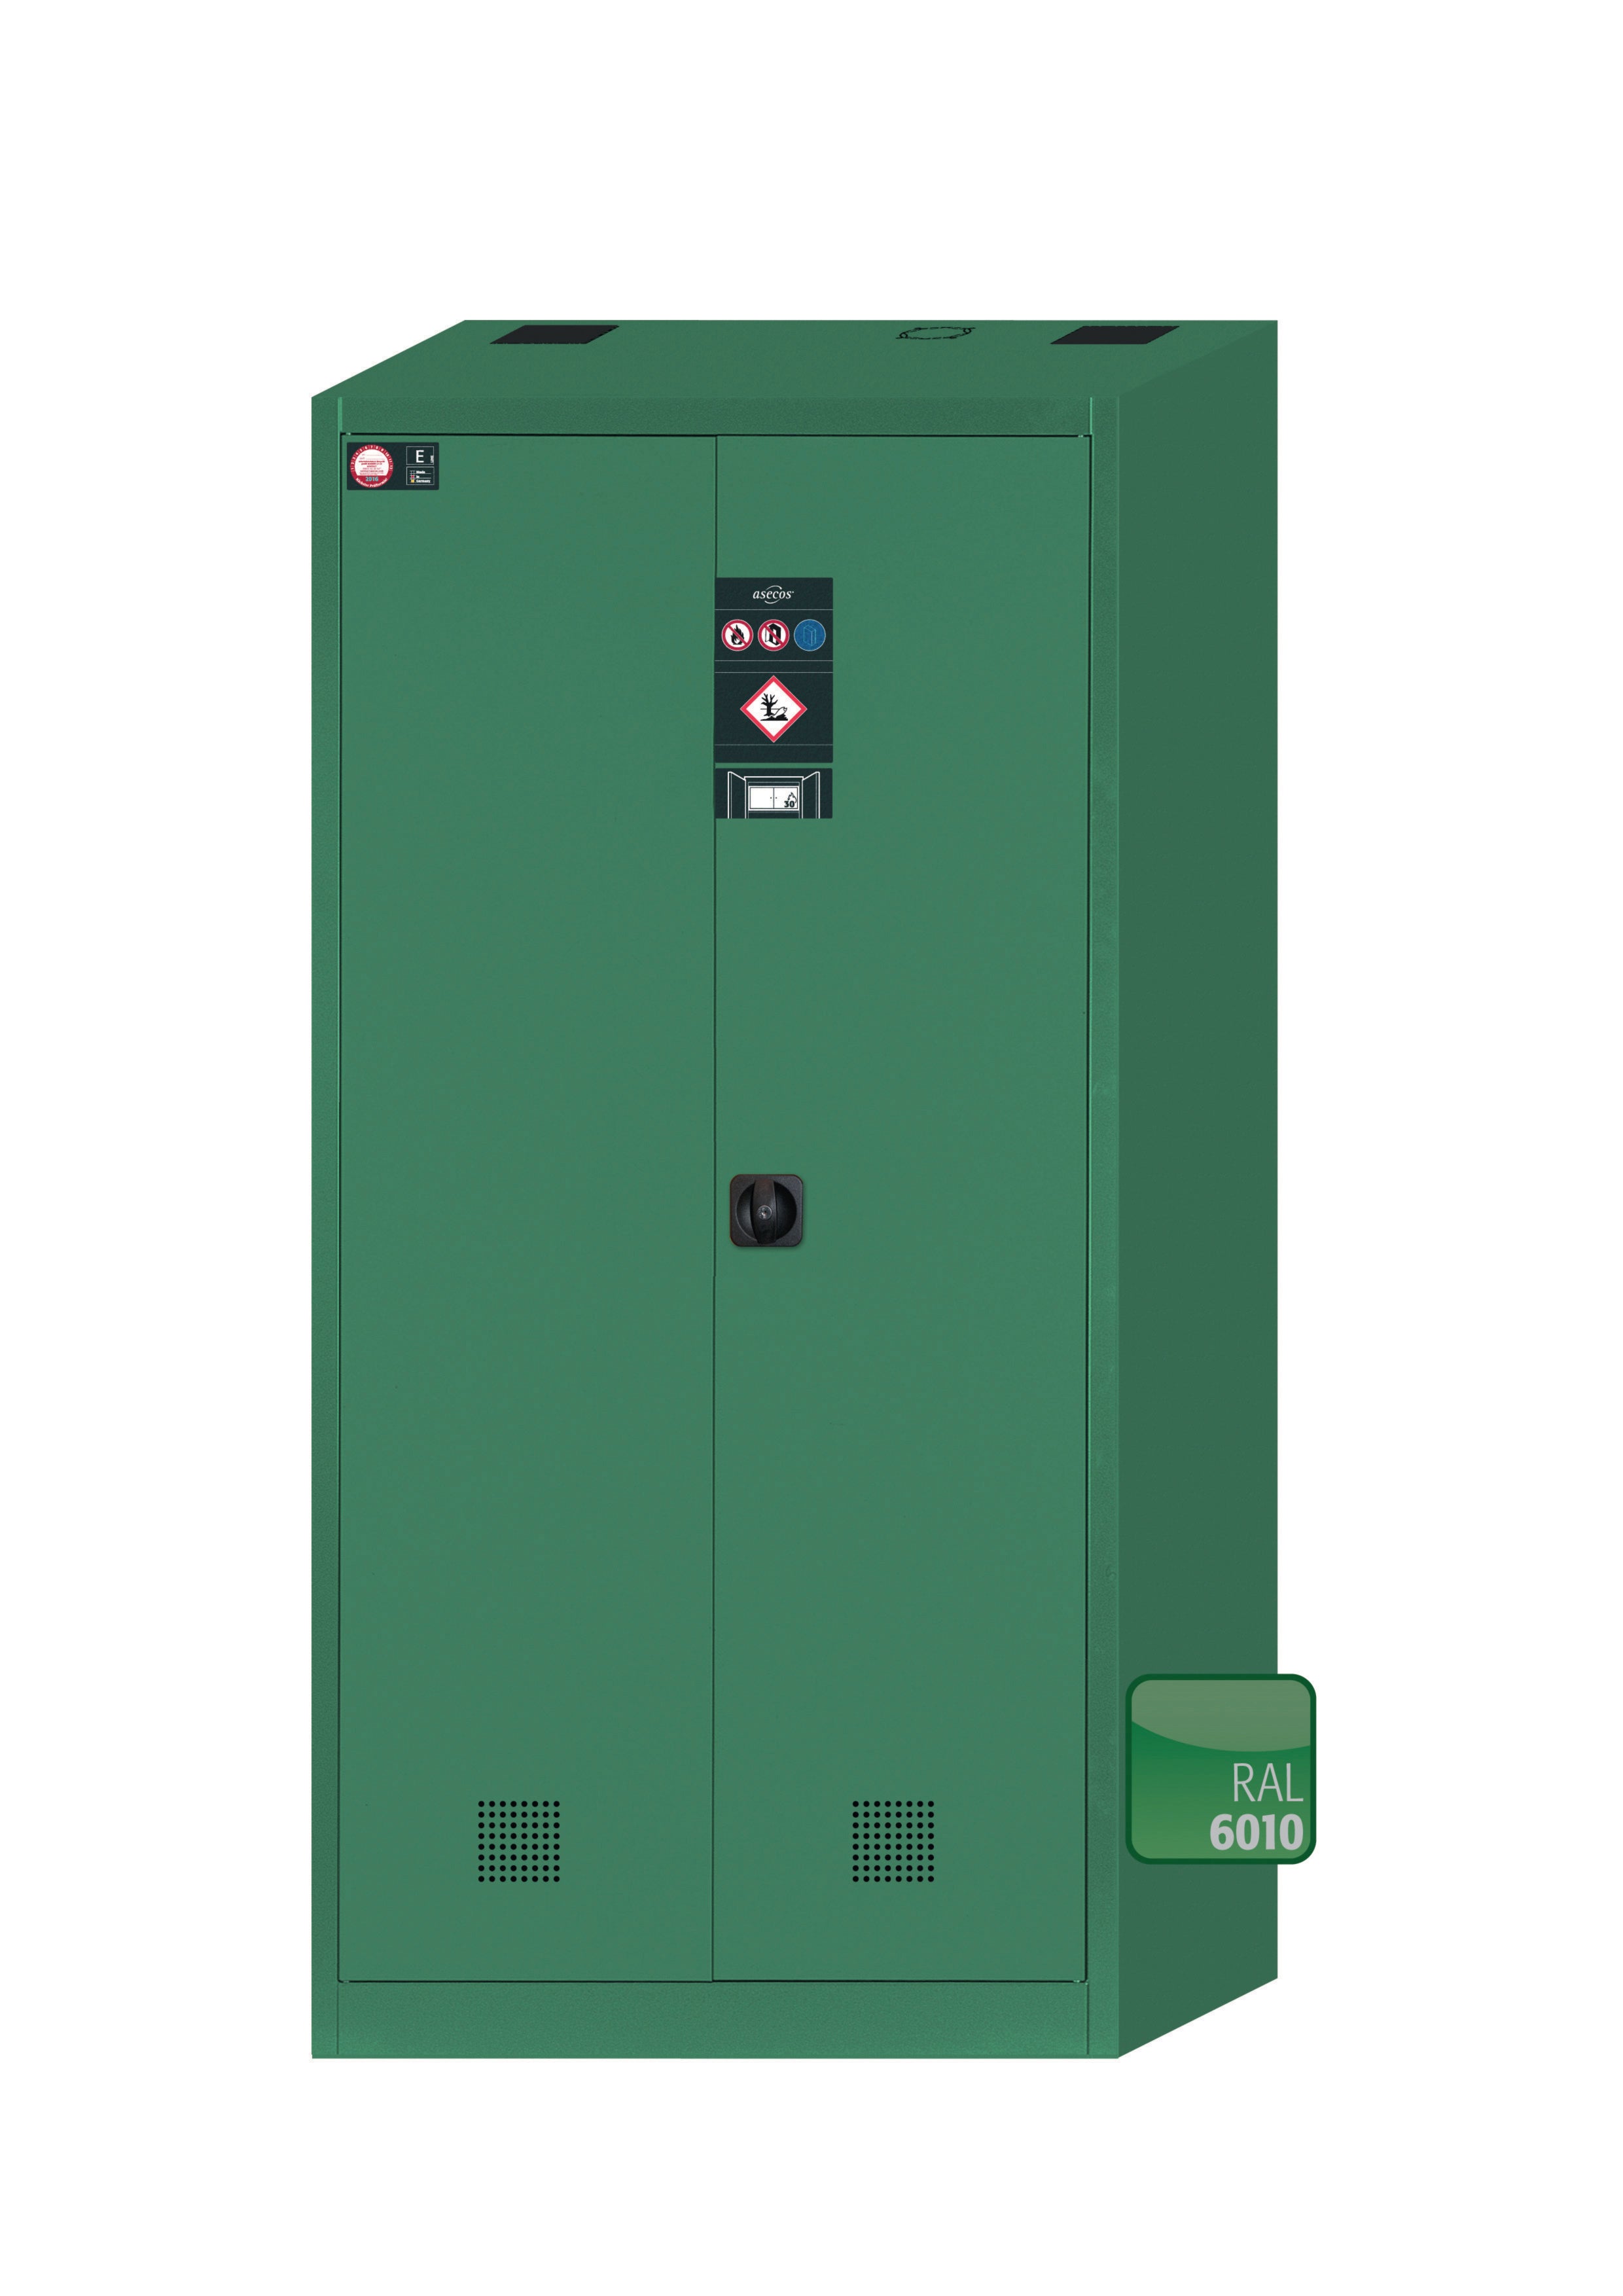 Plant protection product cabinet E-PSM-UF model EP.195.095.F2 (àœHP equipment incl. Type 30 box) in turquoise green RAL 6016 with 2x tray base STAWA-R (sheet steel)